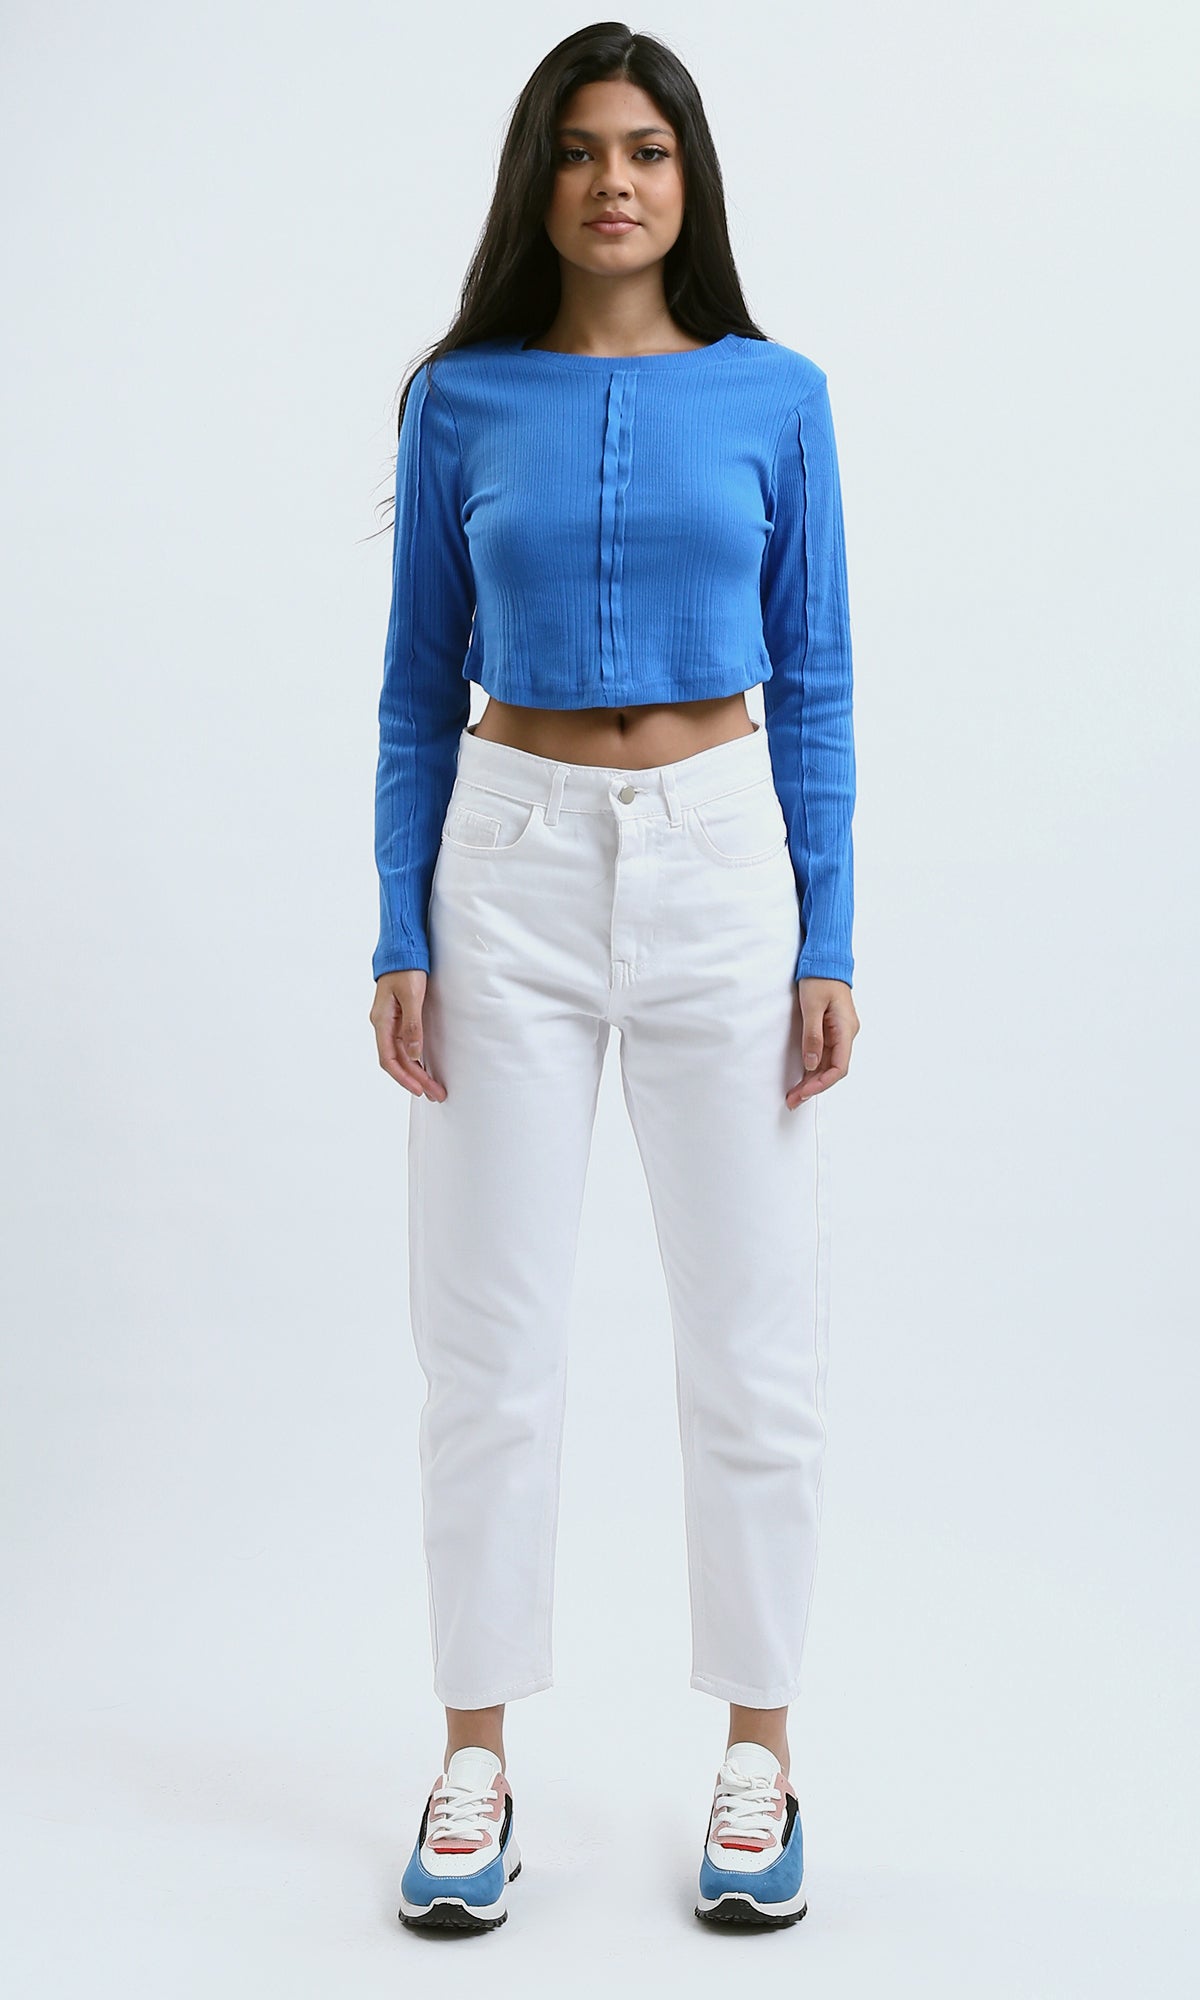 O189736 Blue Long Sleeves Slip On Cropped Top